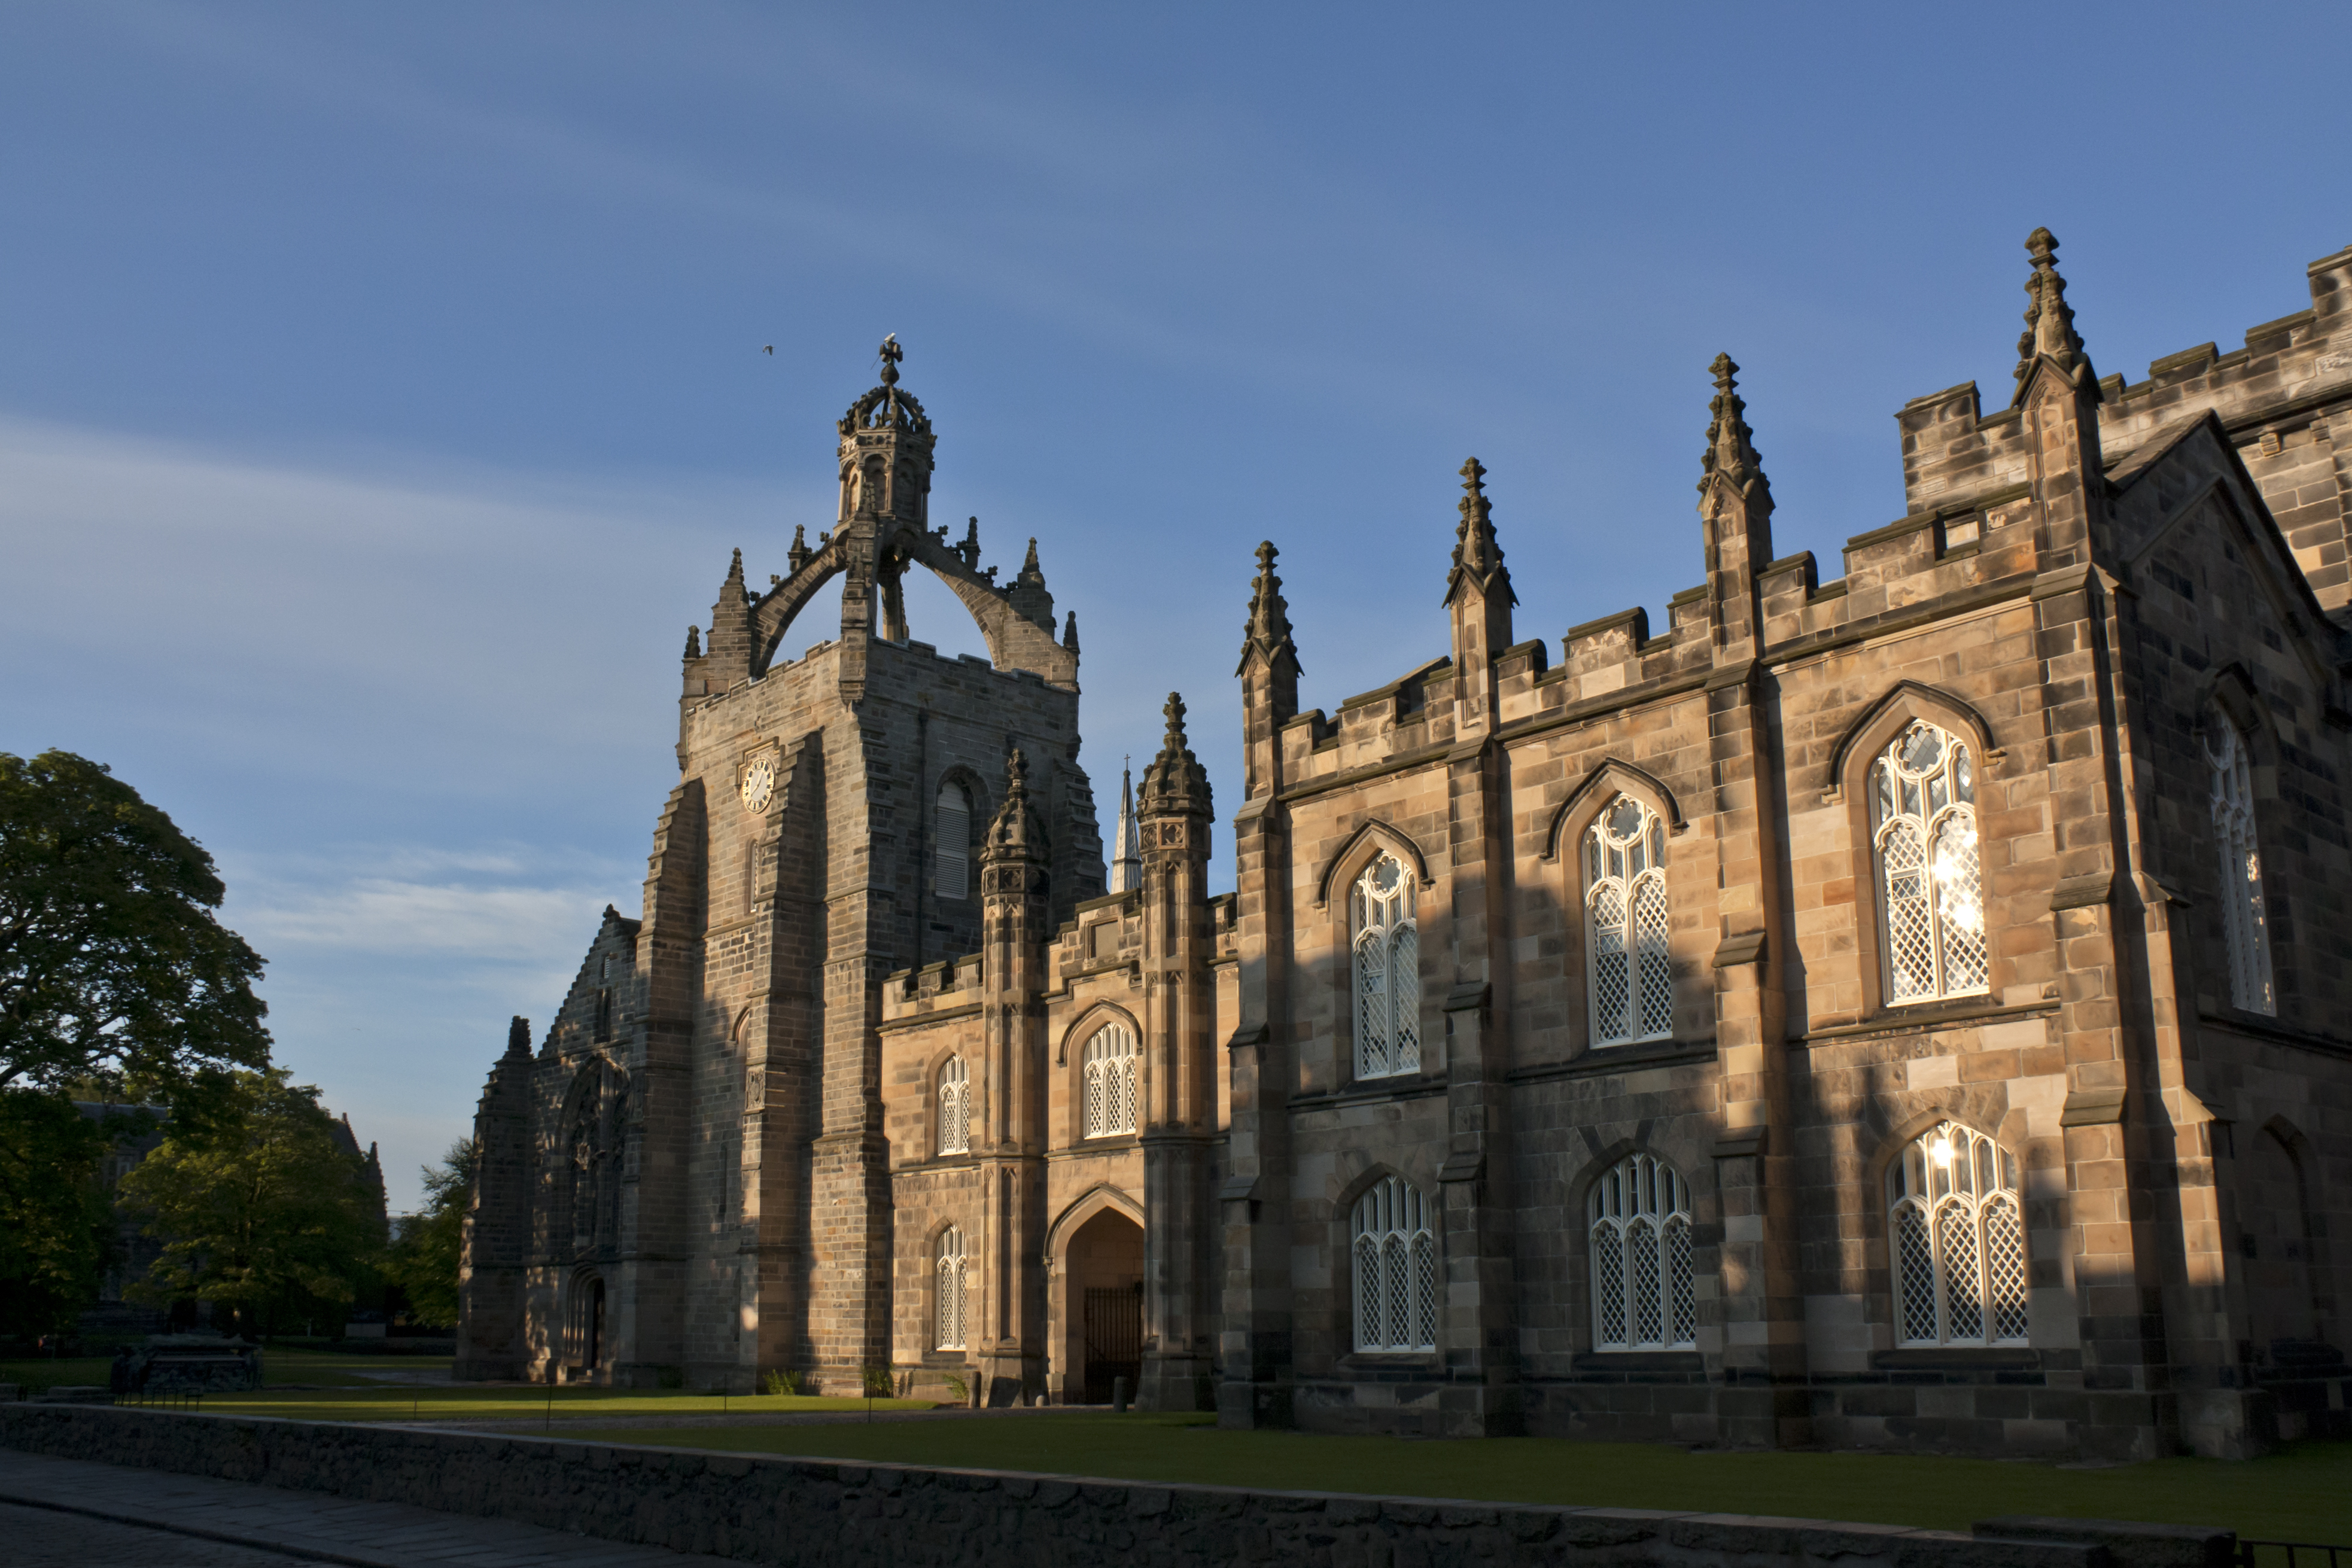 The King's College Chapel, built in the late 15th century, is the oldest building of the University of Aberdeen.